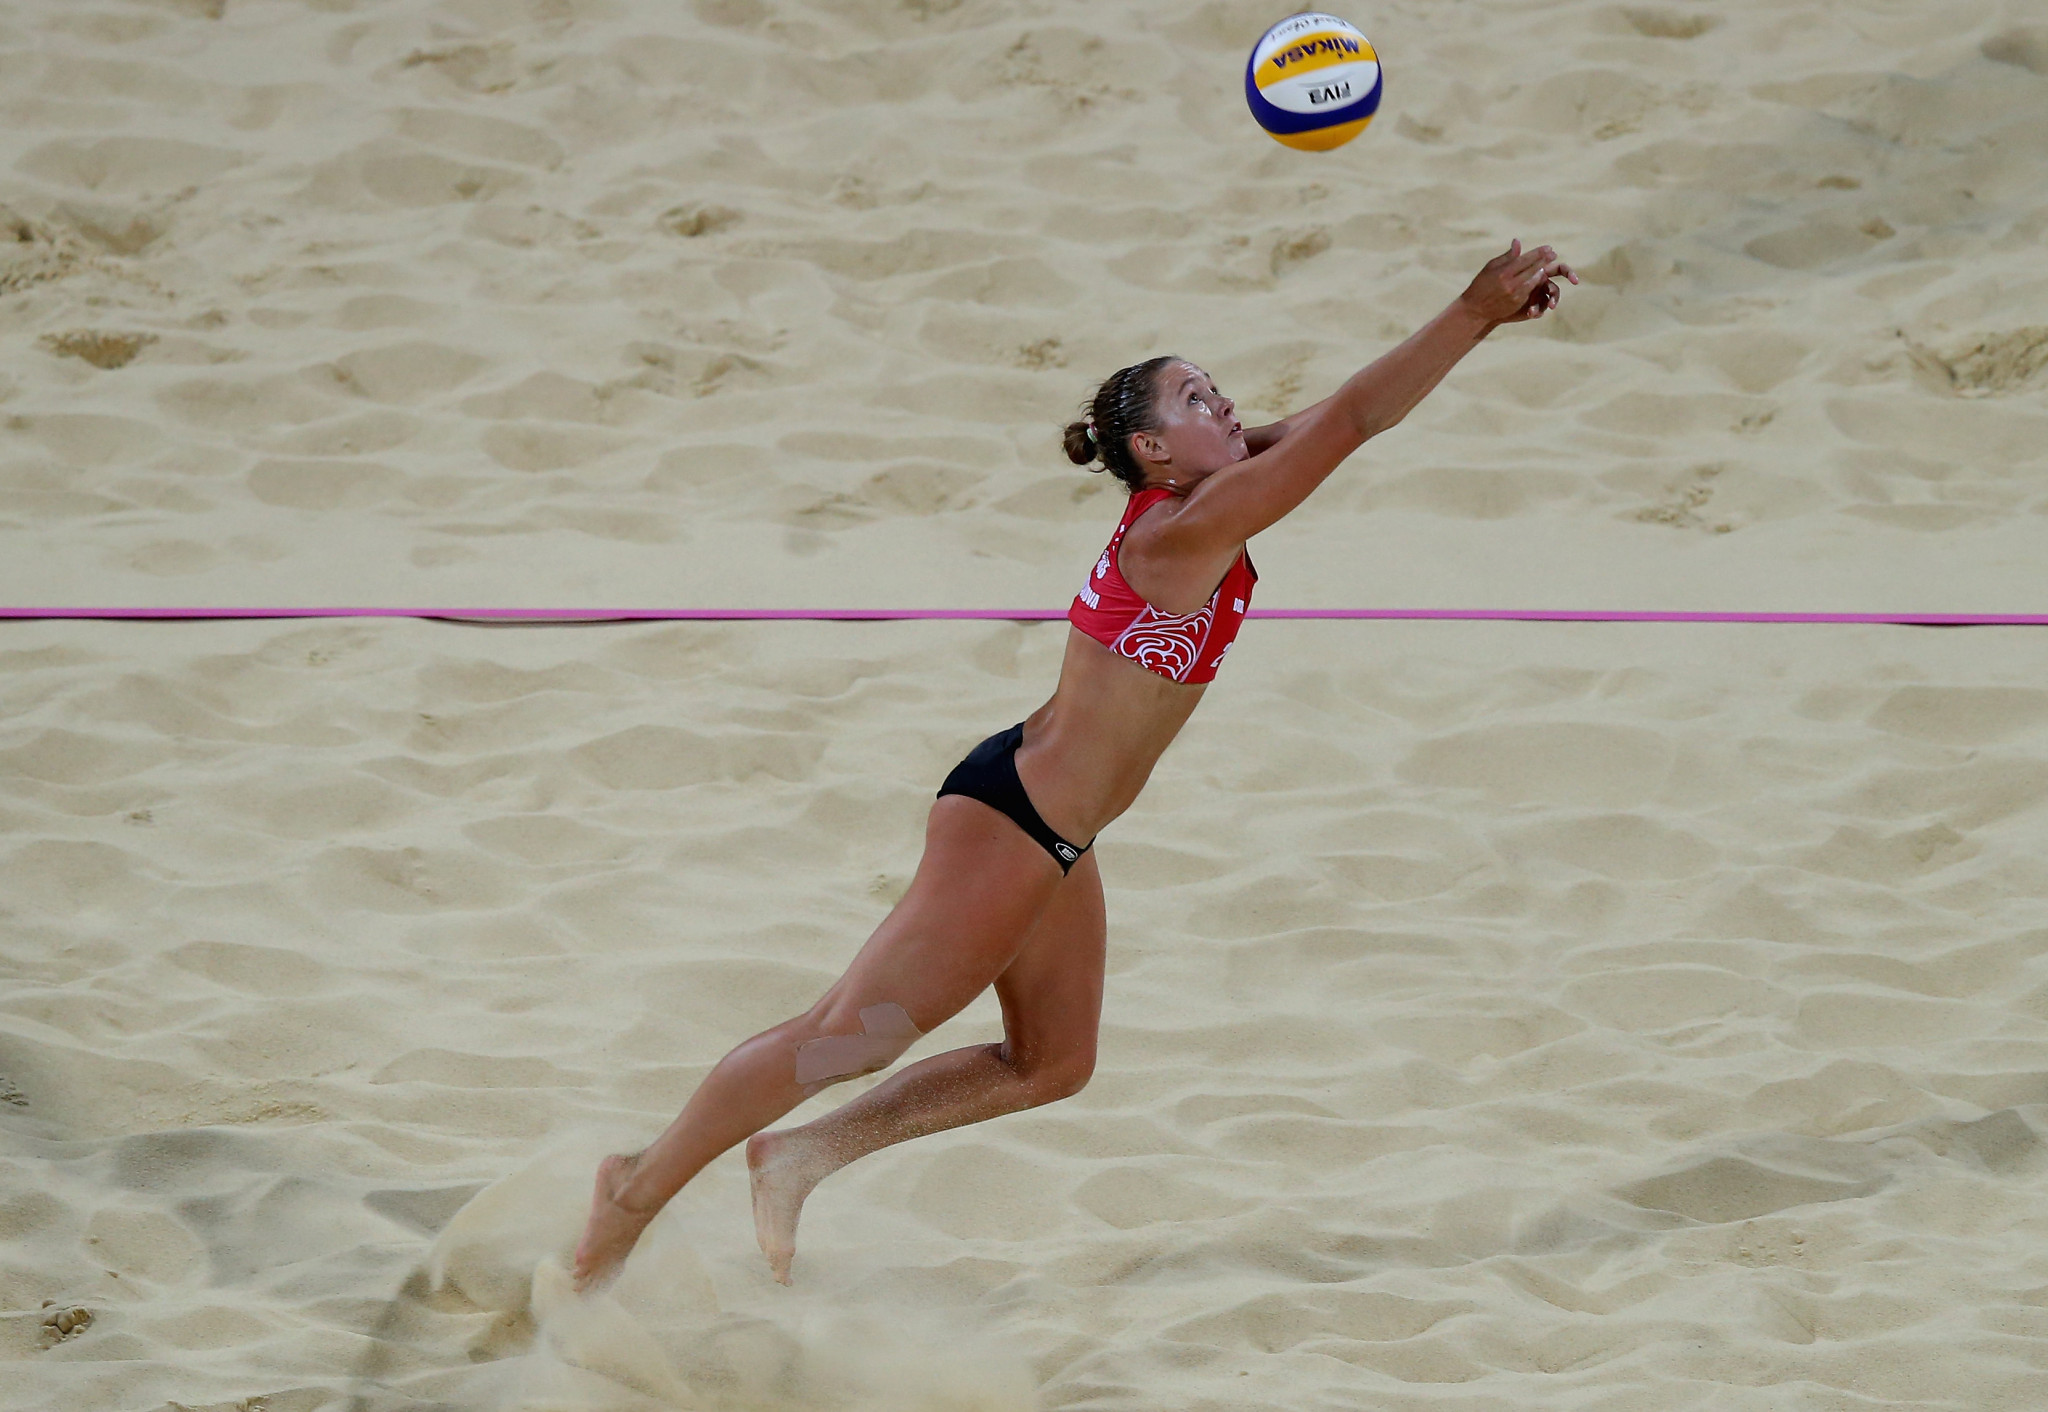 FIVB confirm latest Russian volleyball player from London 2012 banned as result of Rodchenkov evidence 